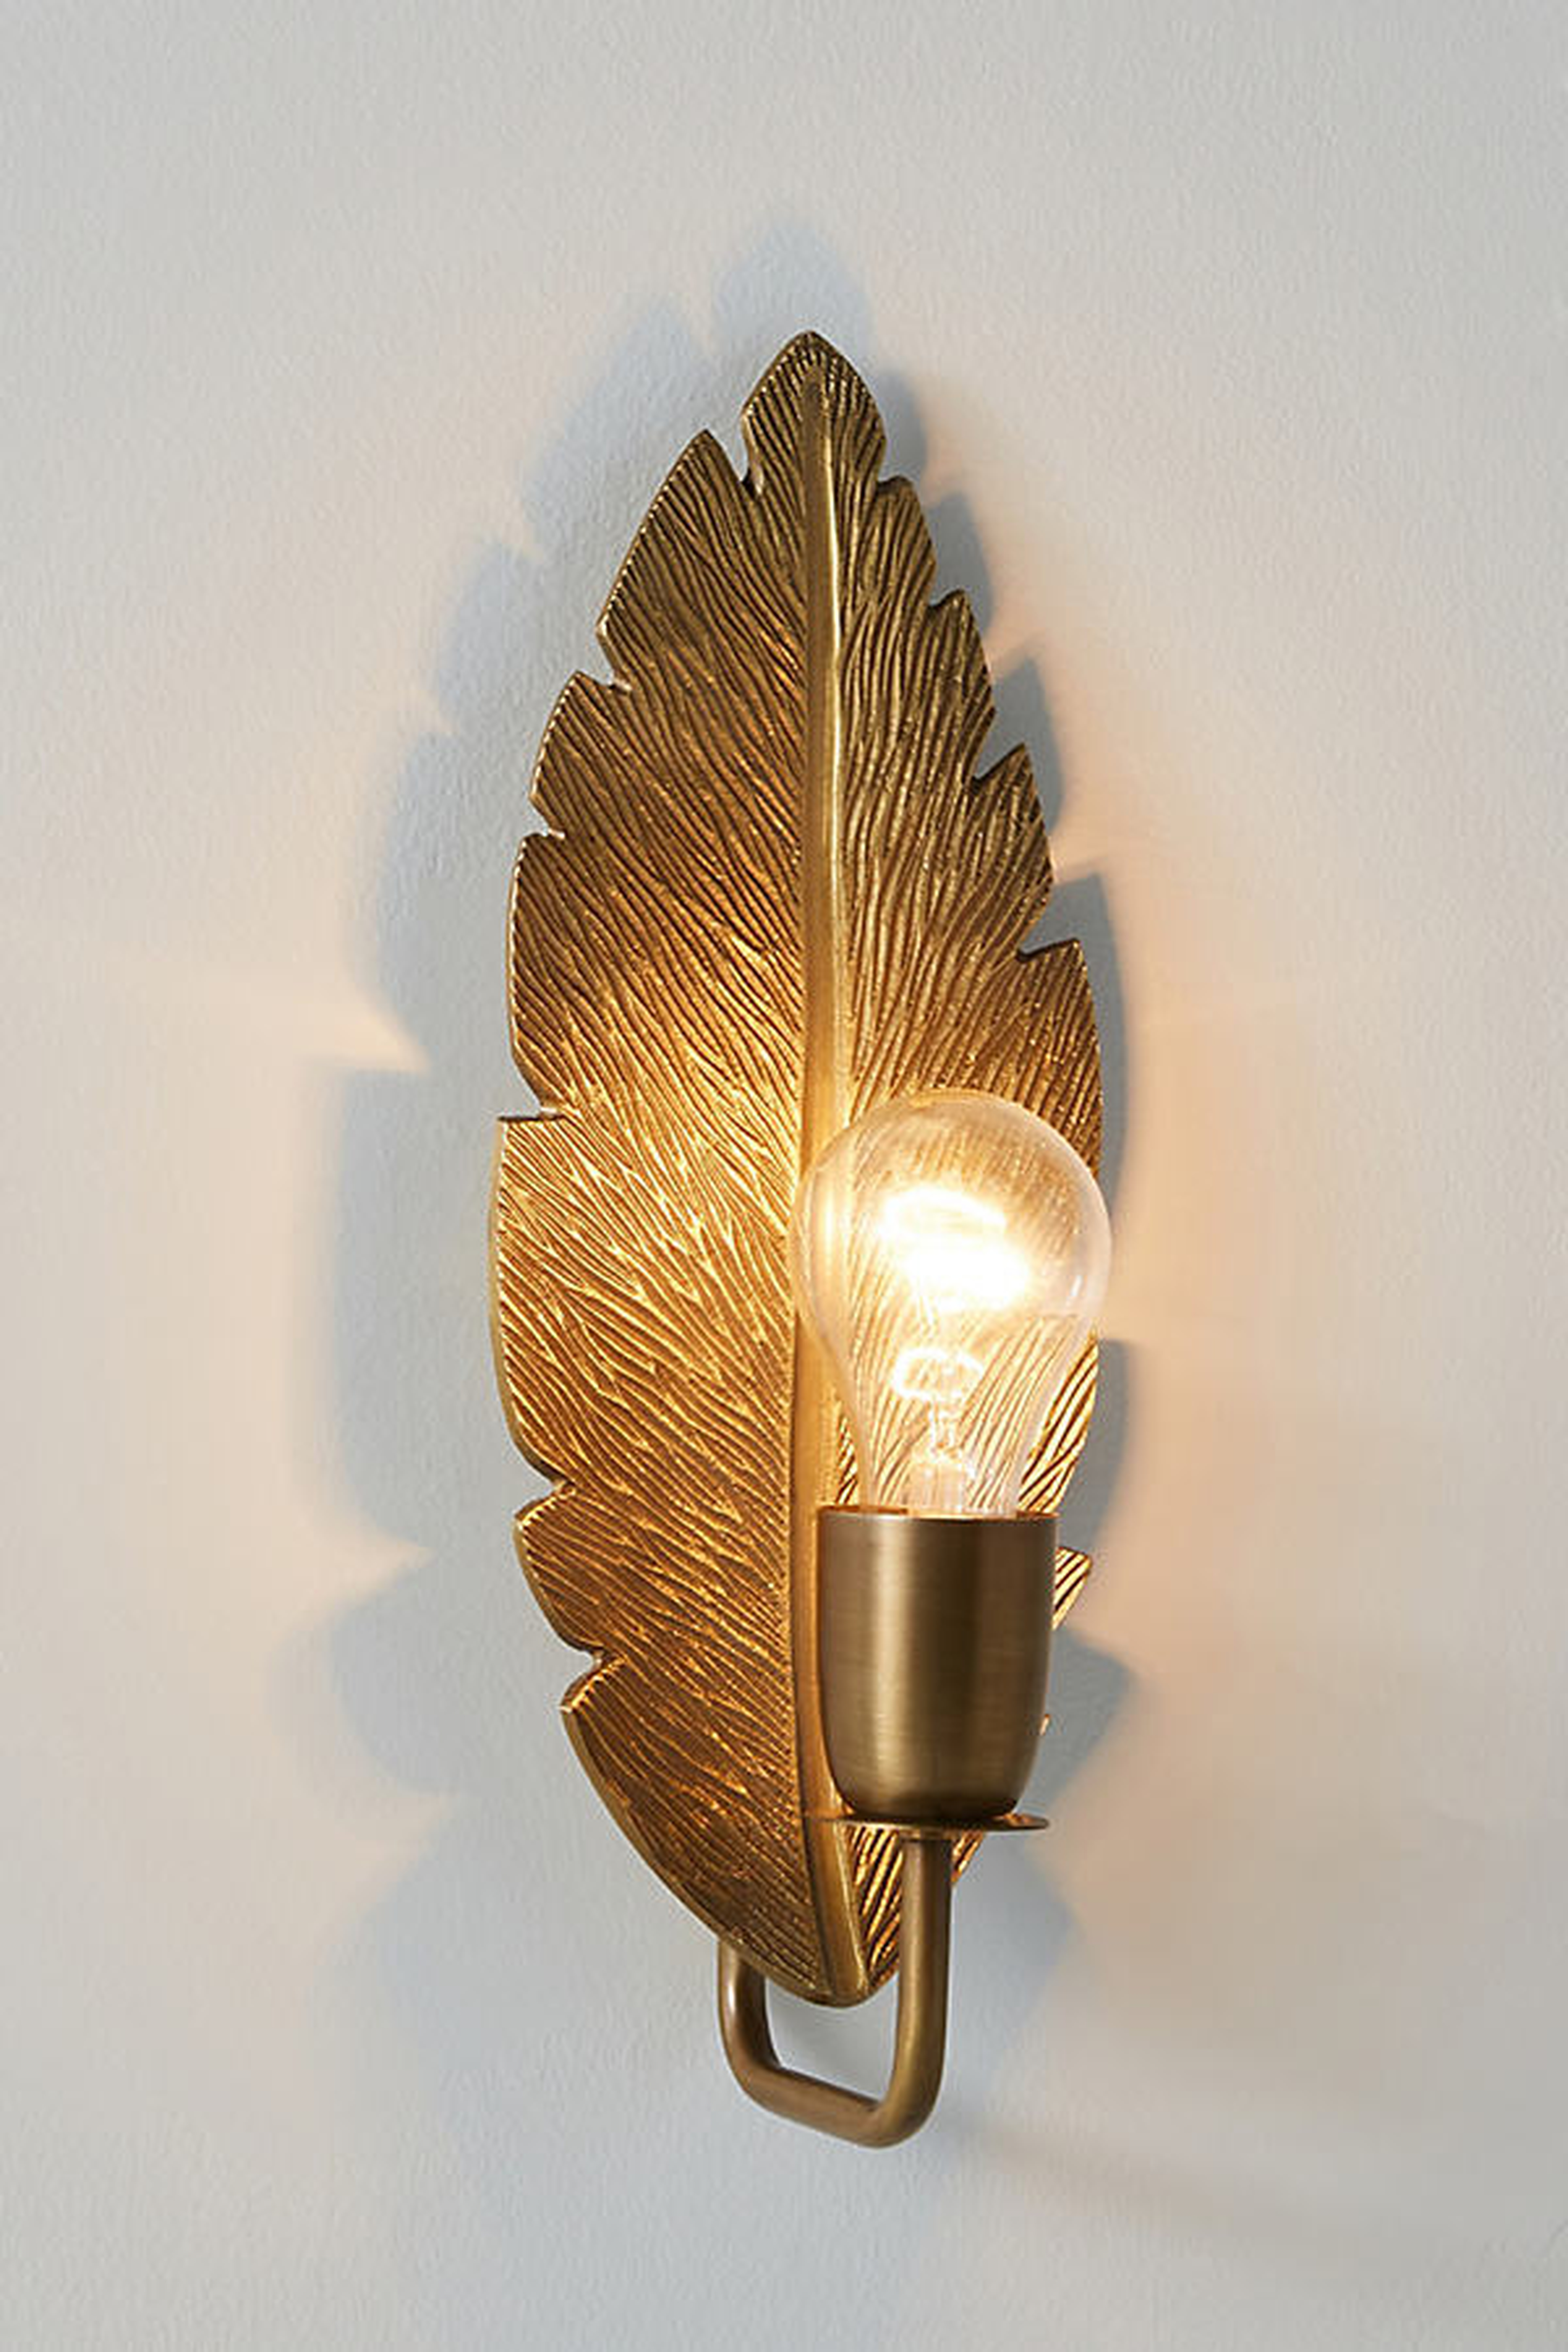 Quill Feather Sconce By Anthropologie in Brown - Anthropologie